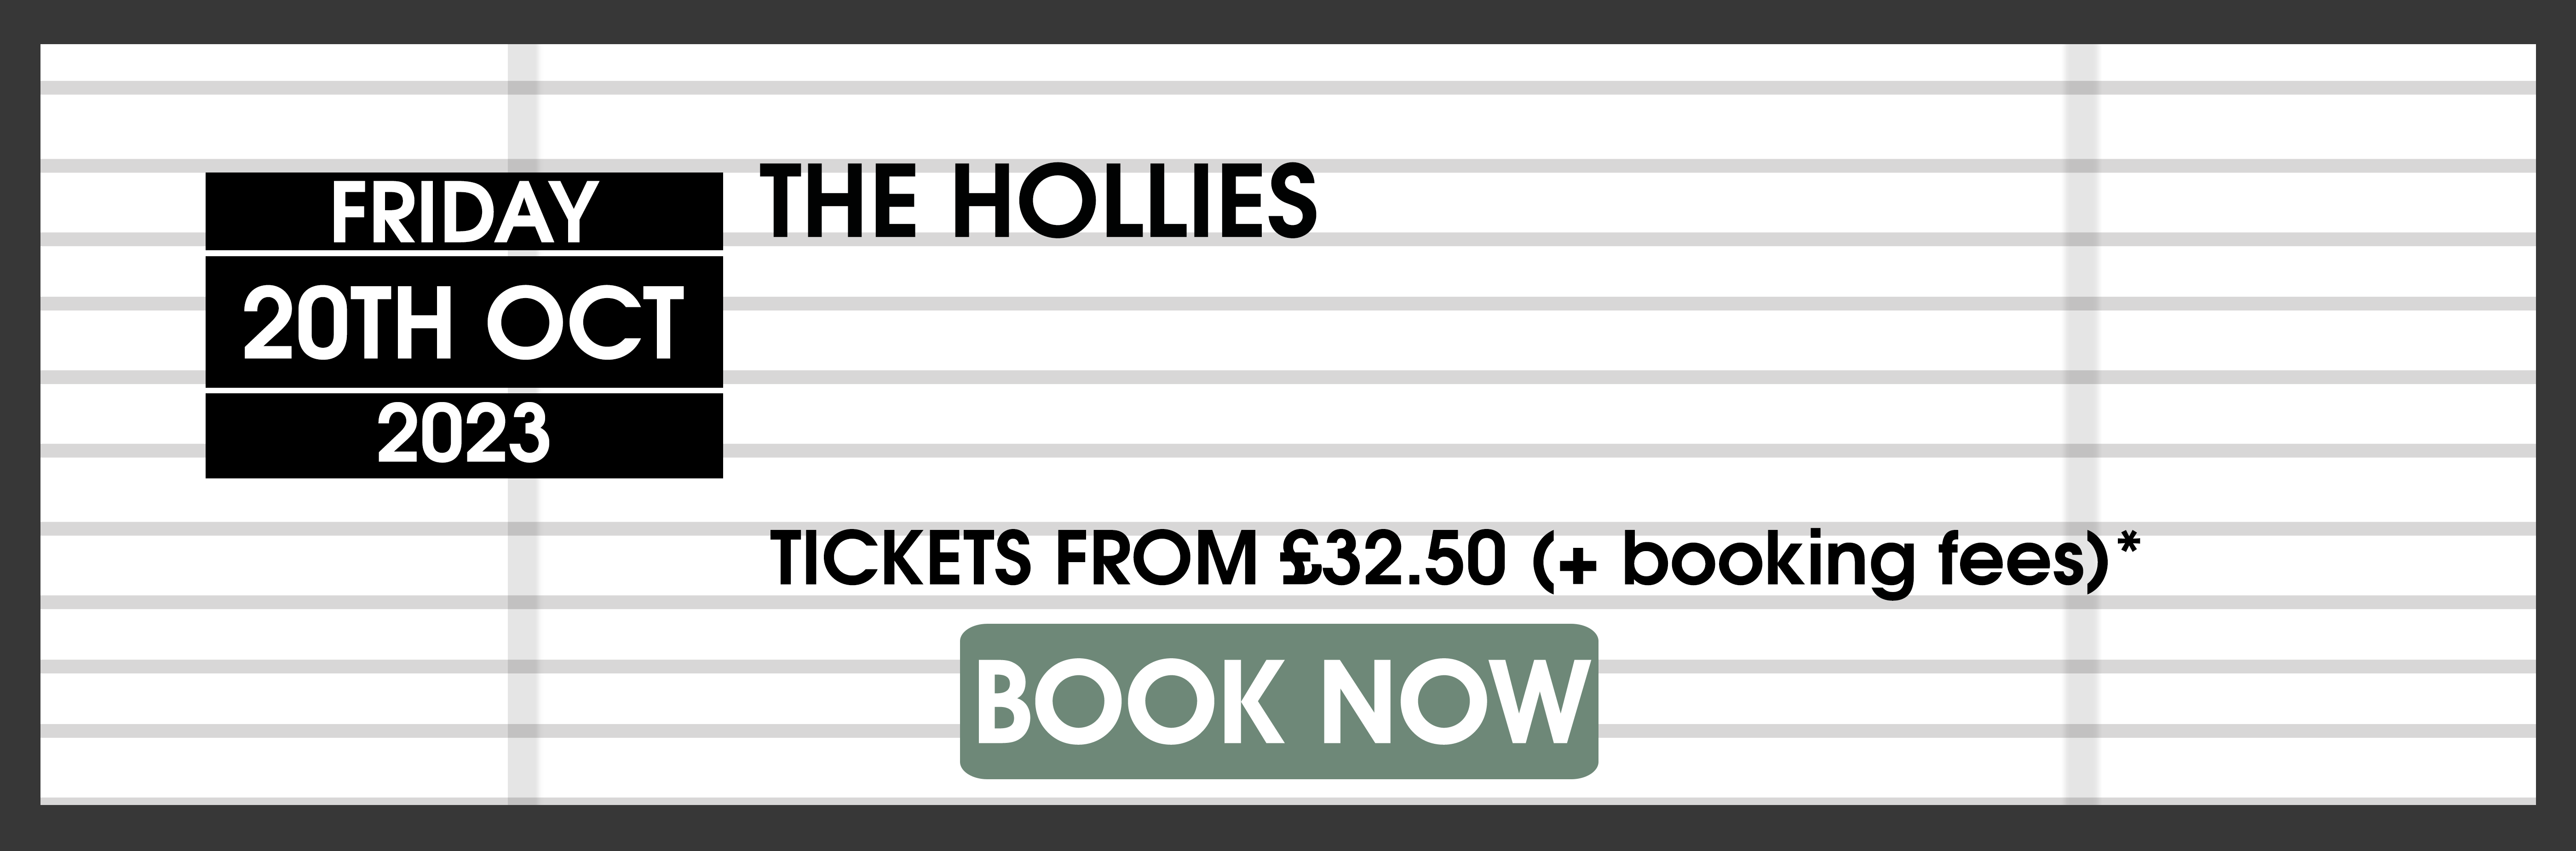 23.10.20 Hollies BOOK NOW